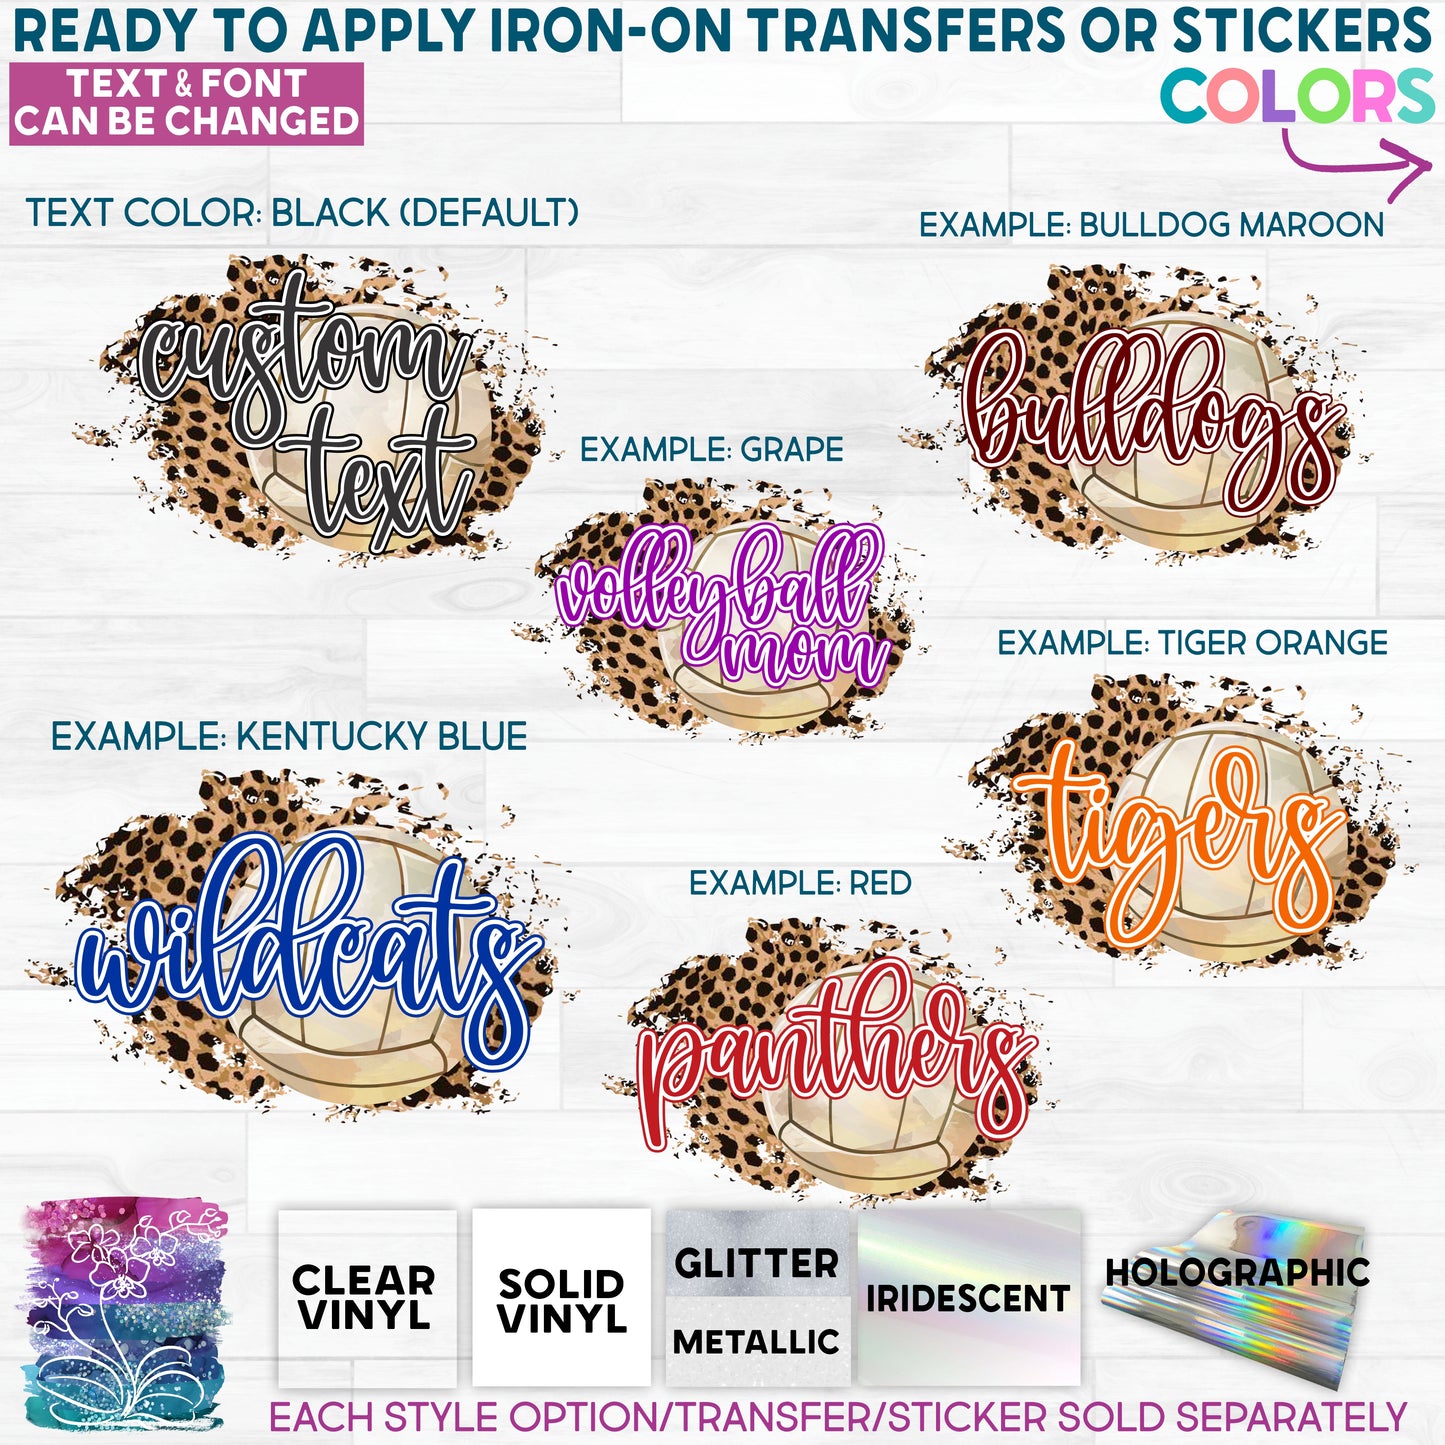 (s334-C6) Volleyball Leopard Mom, Team Name or Custom Text Glitter or Vinyl Iron-On Transfer or Sticker